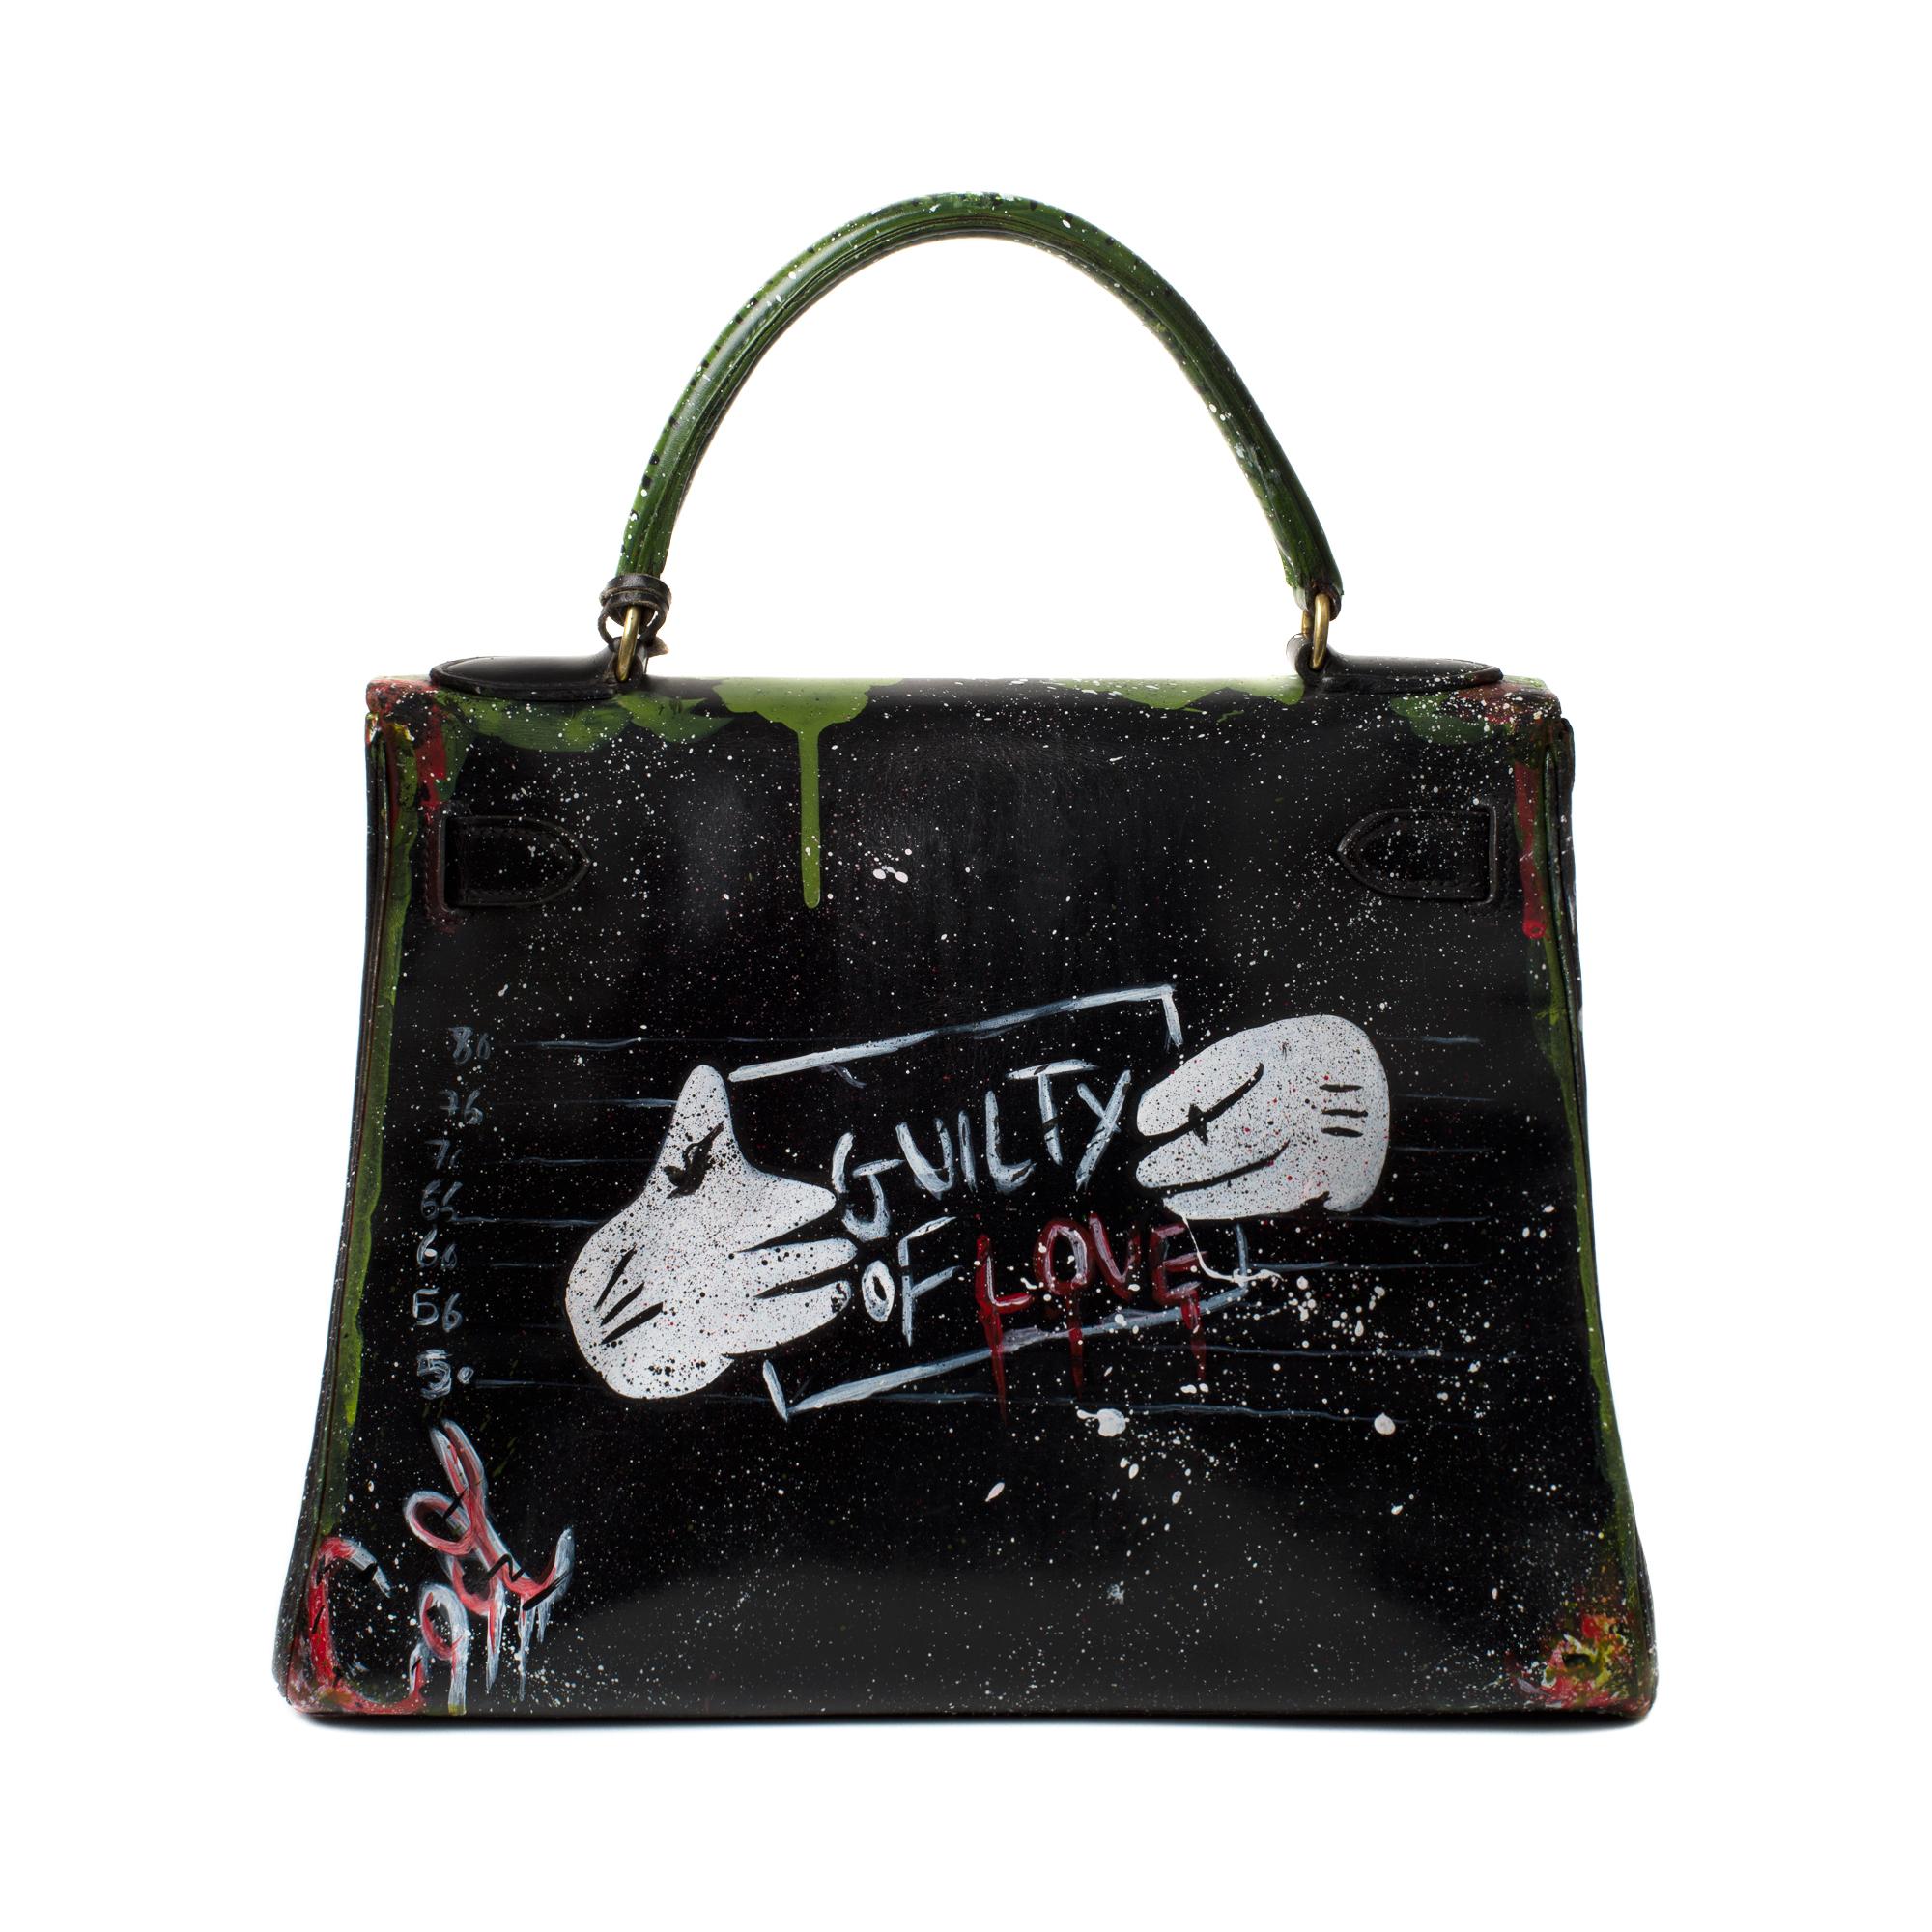 Superb Hermes Kelly 28 in black box leather, hardware in gold plated,
 customized by the artist DARYA entitled 